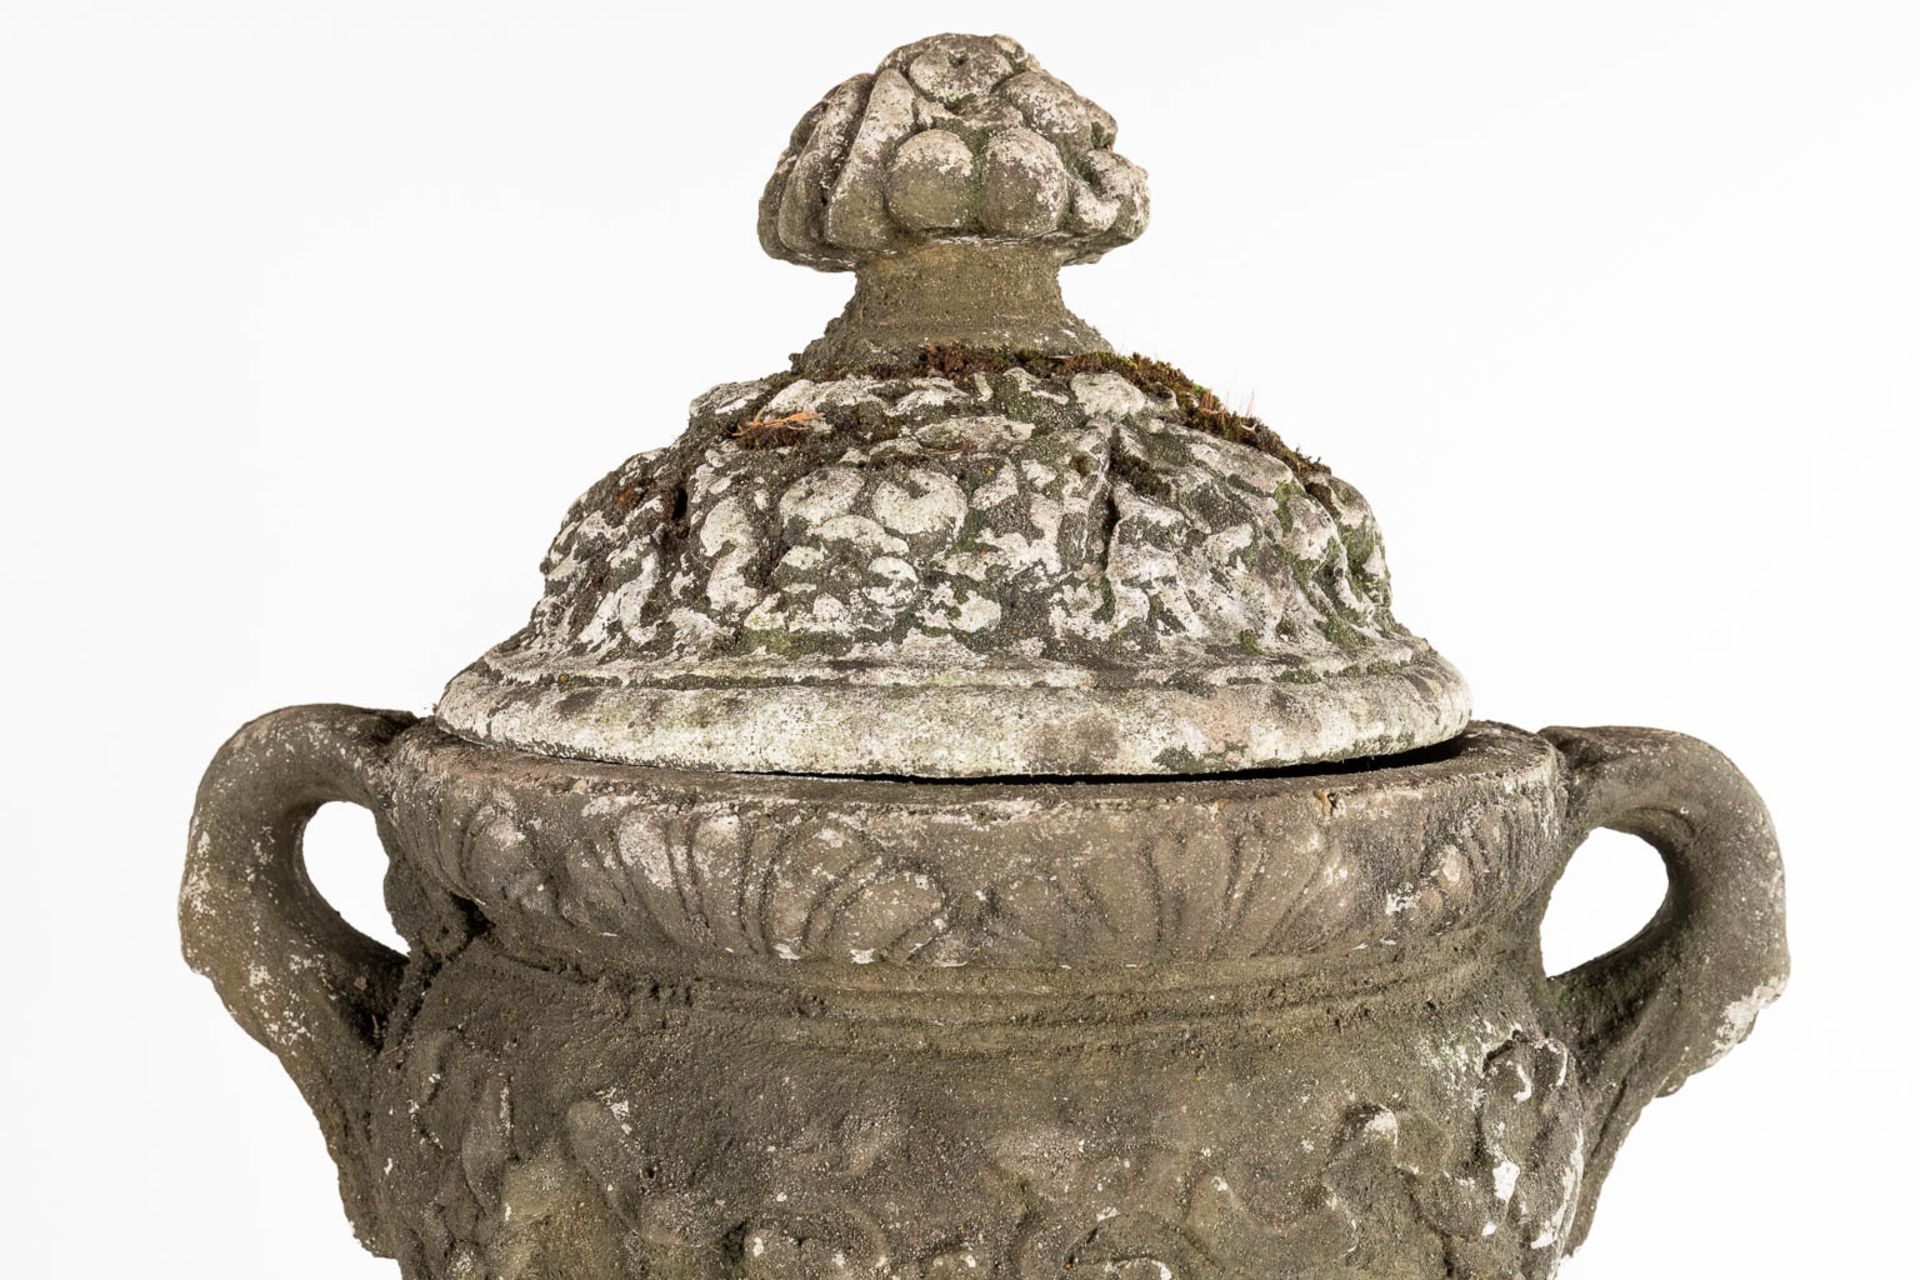 A pair of large urns with a lid, standing on a pedestal, concrete, 20th C. (D:50 x W:67 x H:173 cm) - Image 4 of 8